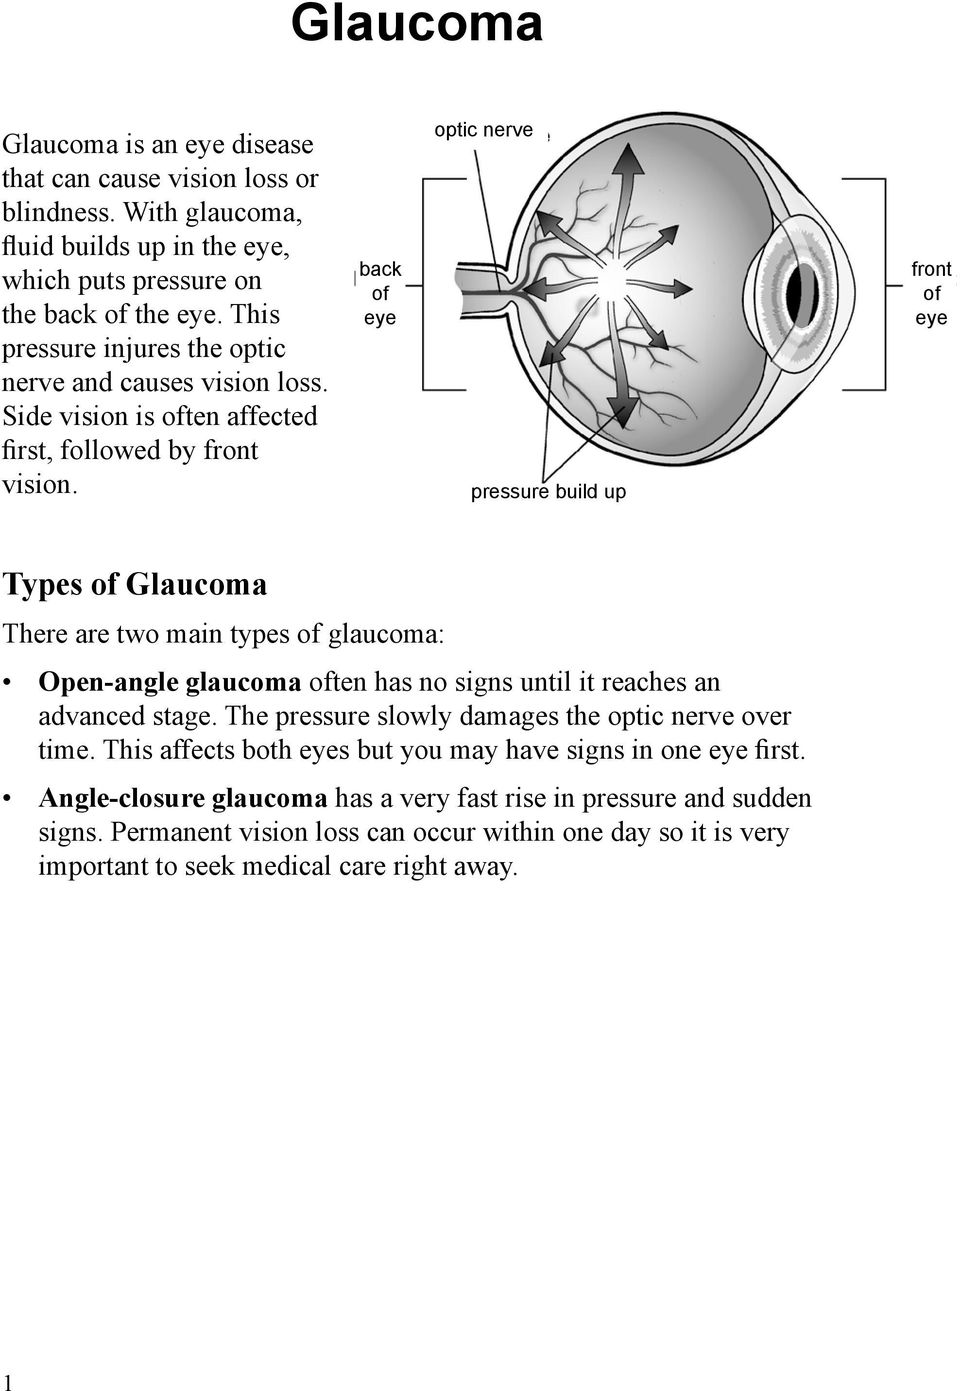 back of eye optic nerve pressure build up front of eye Types of Glaucoma There are two main types of glaucoma: Open-angle glaucoma often has no signs until it reaches an advanced stage.